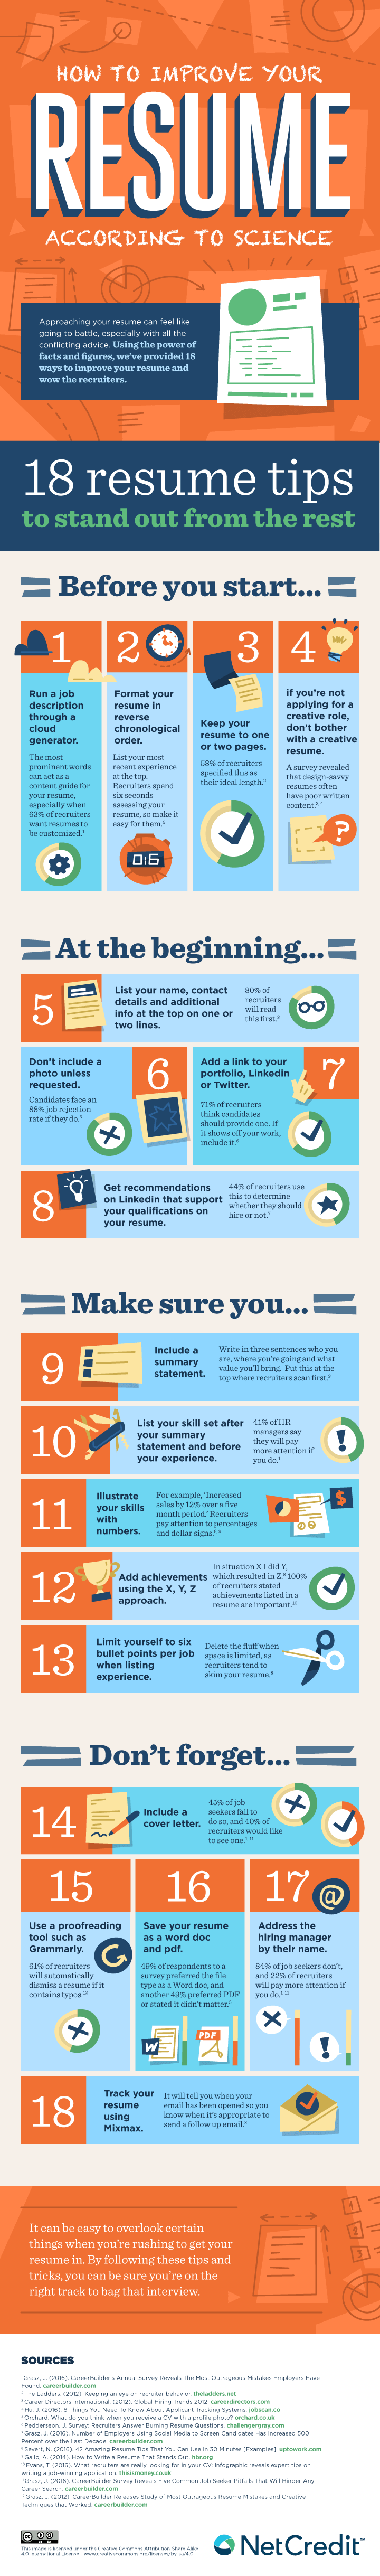 How to Improve Your Resume According to Science - #infographic